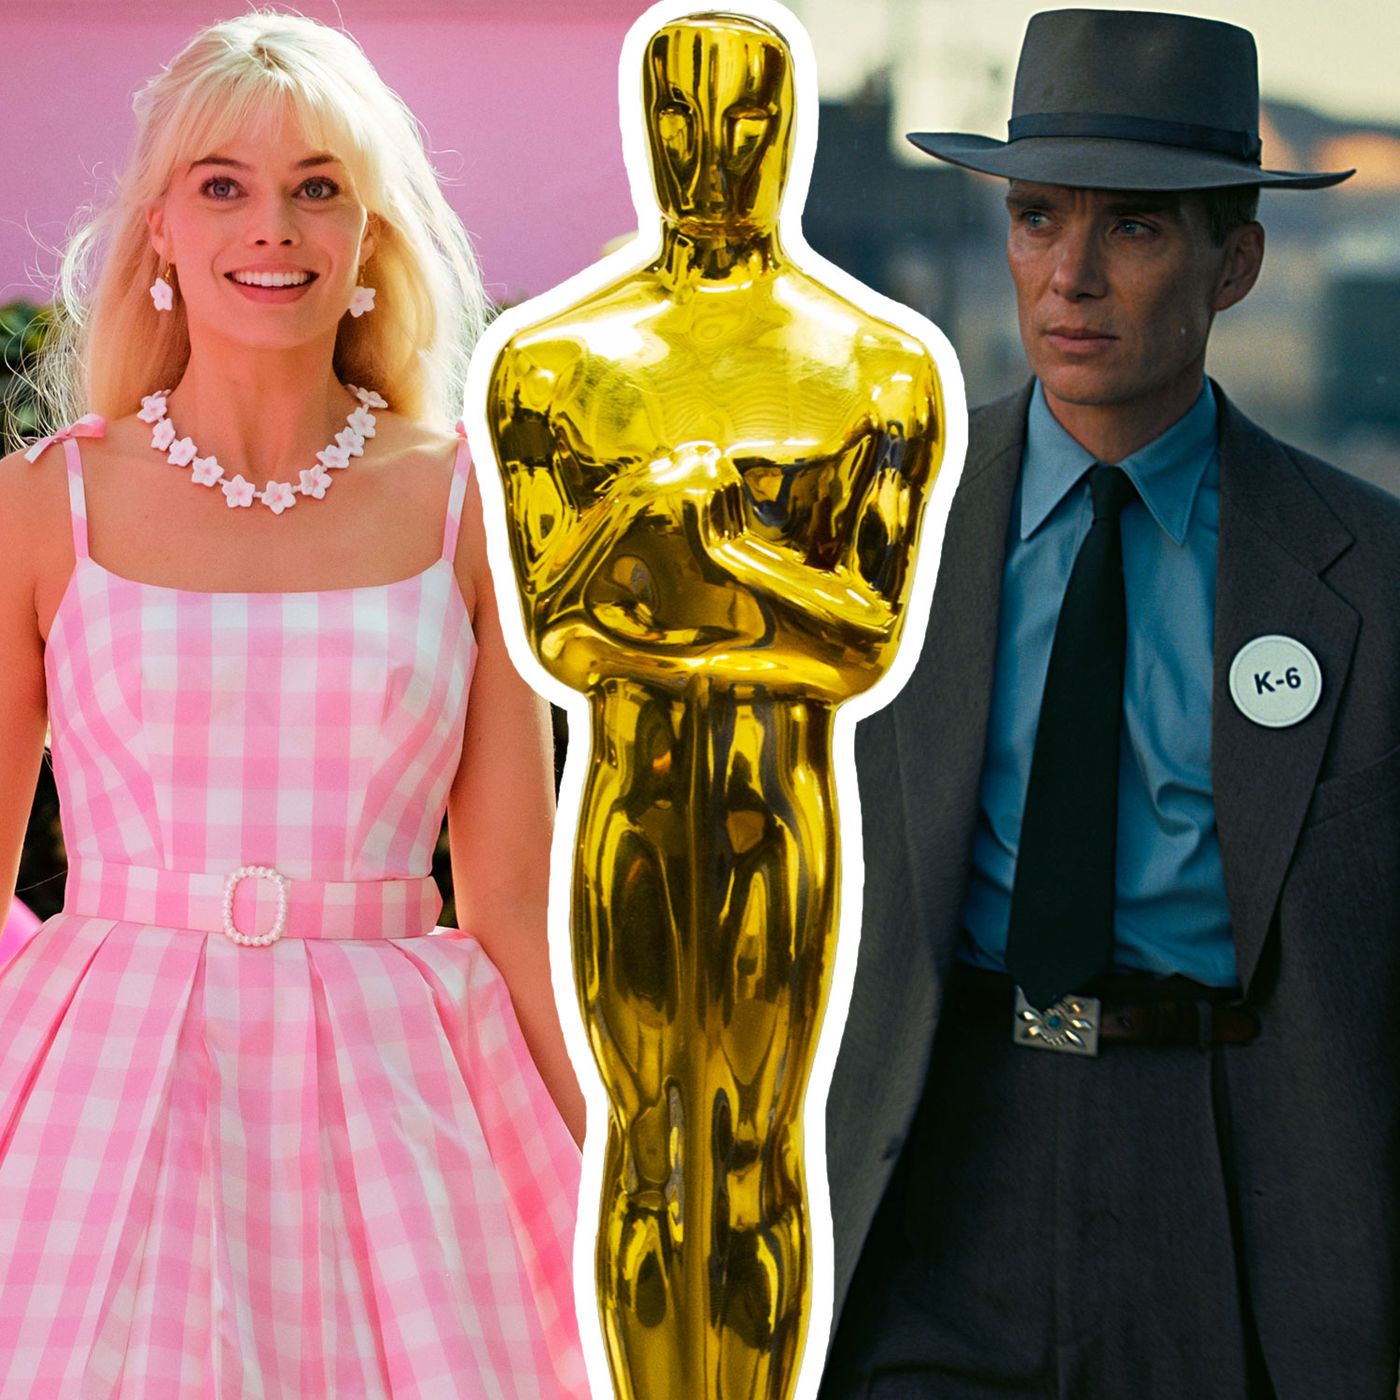 The Oscars host may be a thing of the past – good